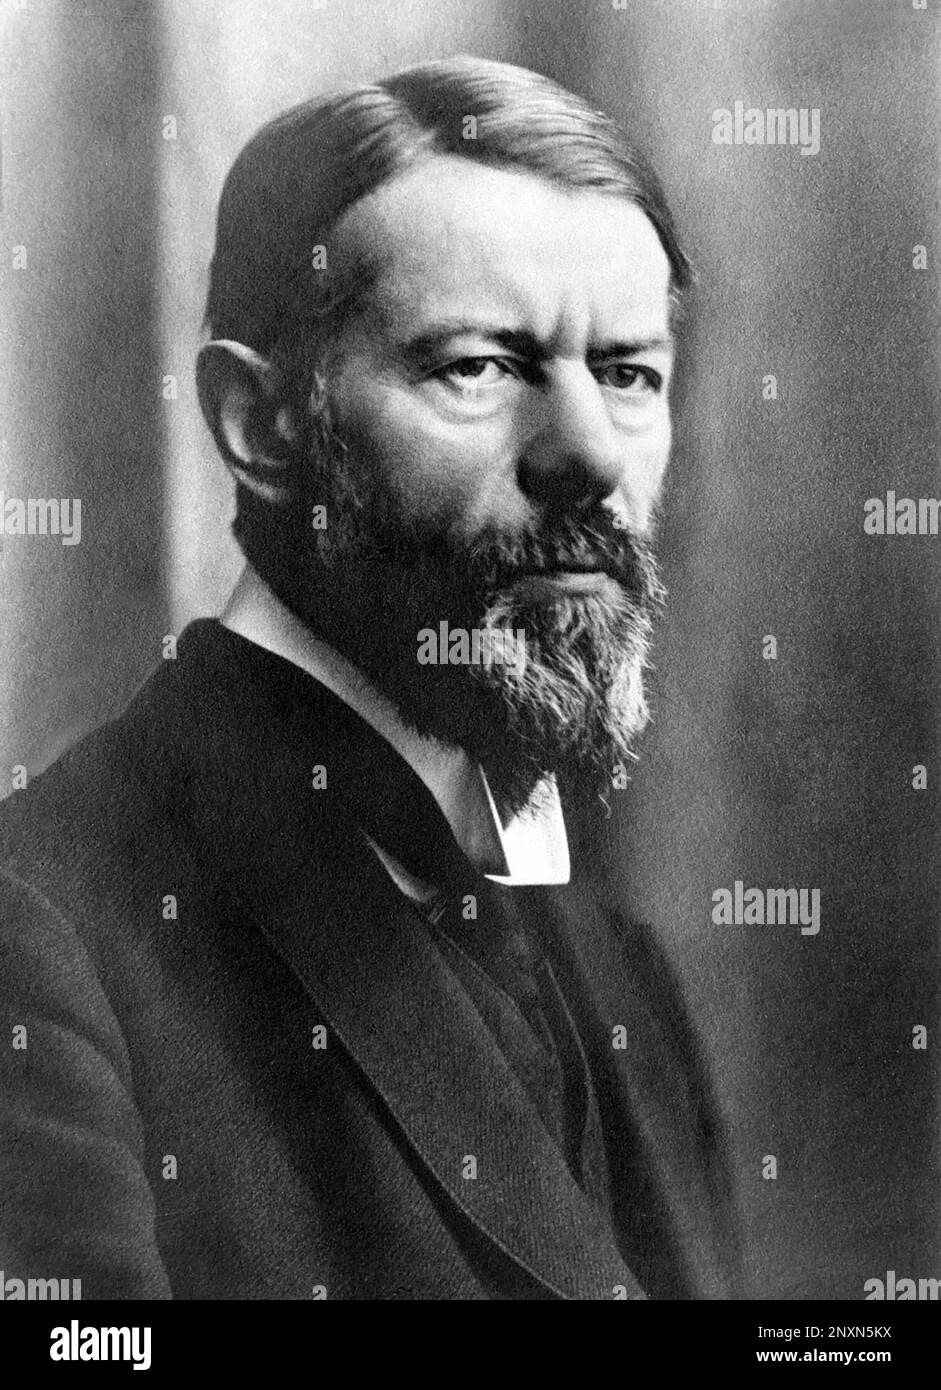 Max Weber in 1918. Weber (1864-1920) was a German sociologist and historian, and is commonly cited as one of the principal architects of modern social science. Stock Photo